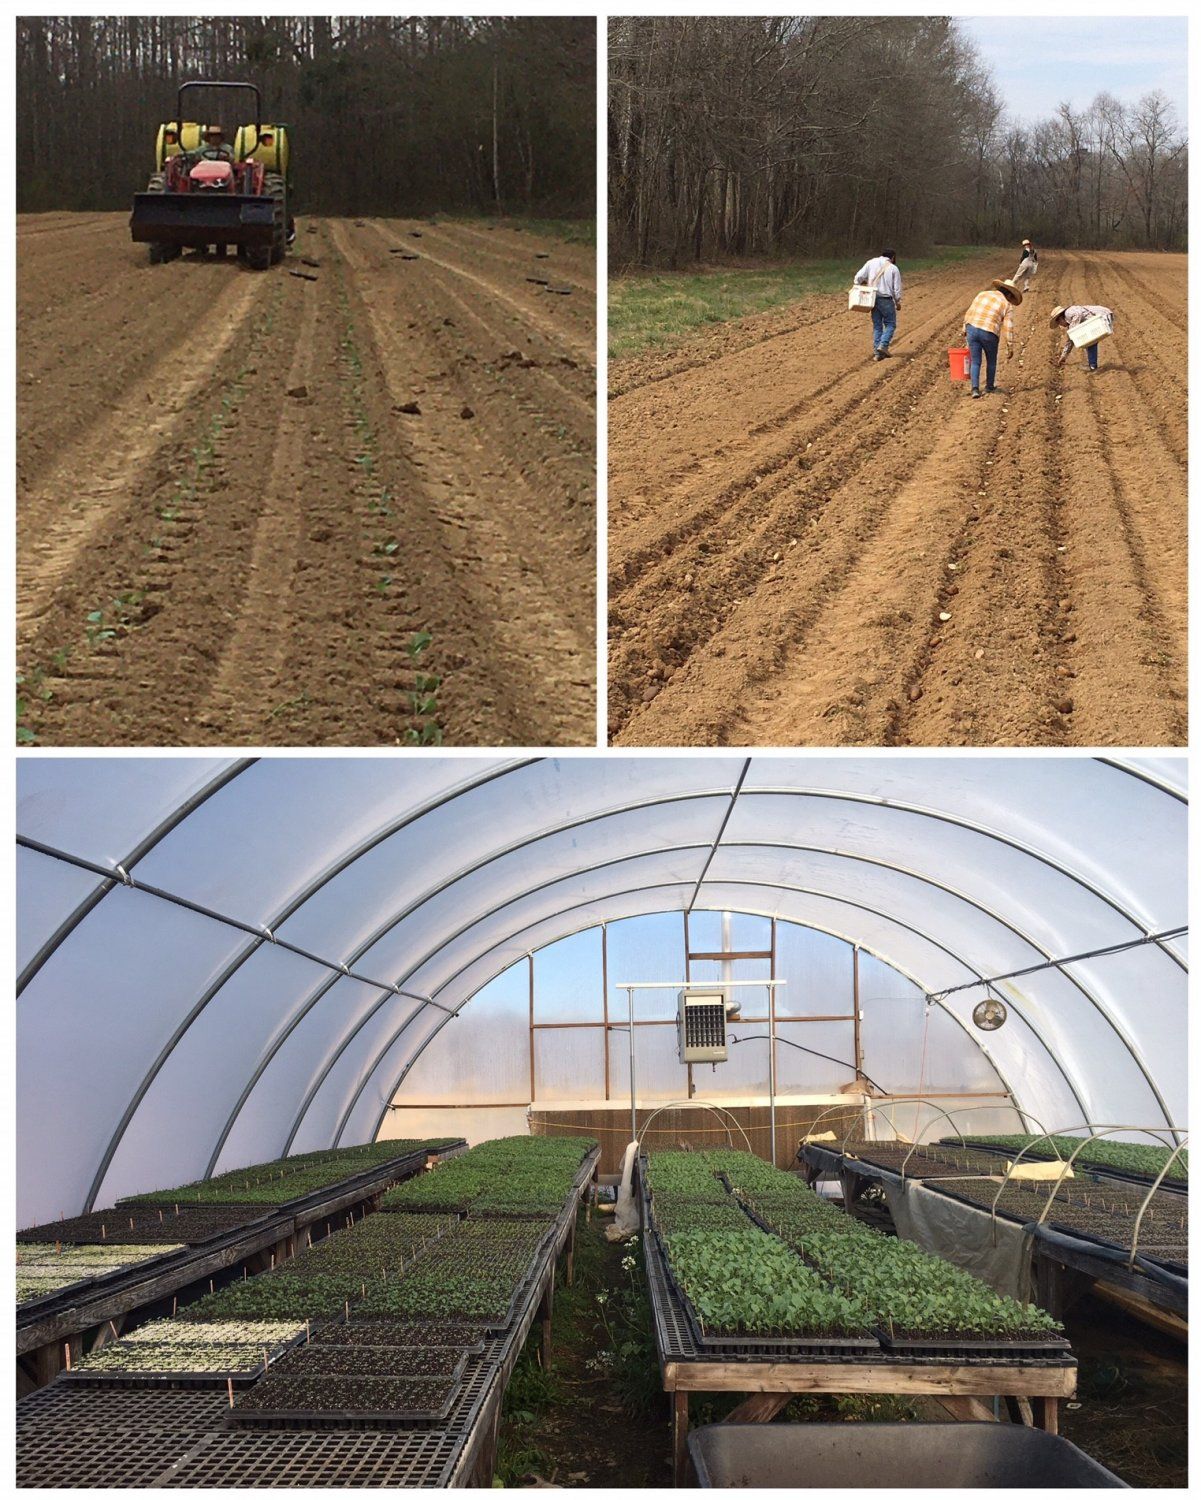 Next Happening: Farm Happenings for March 23rd, 2021